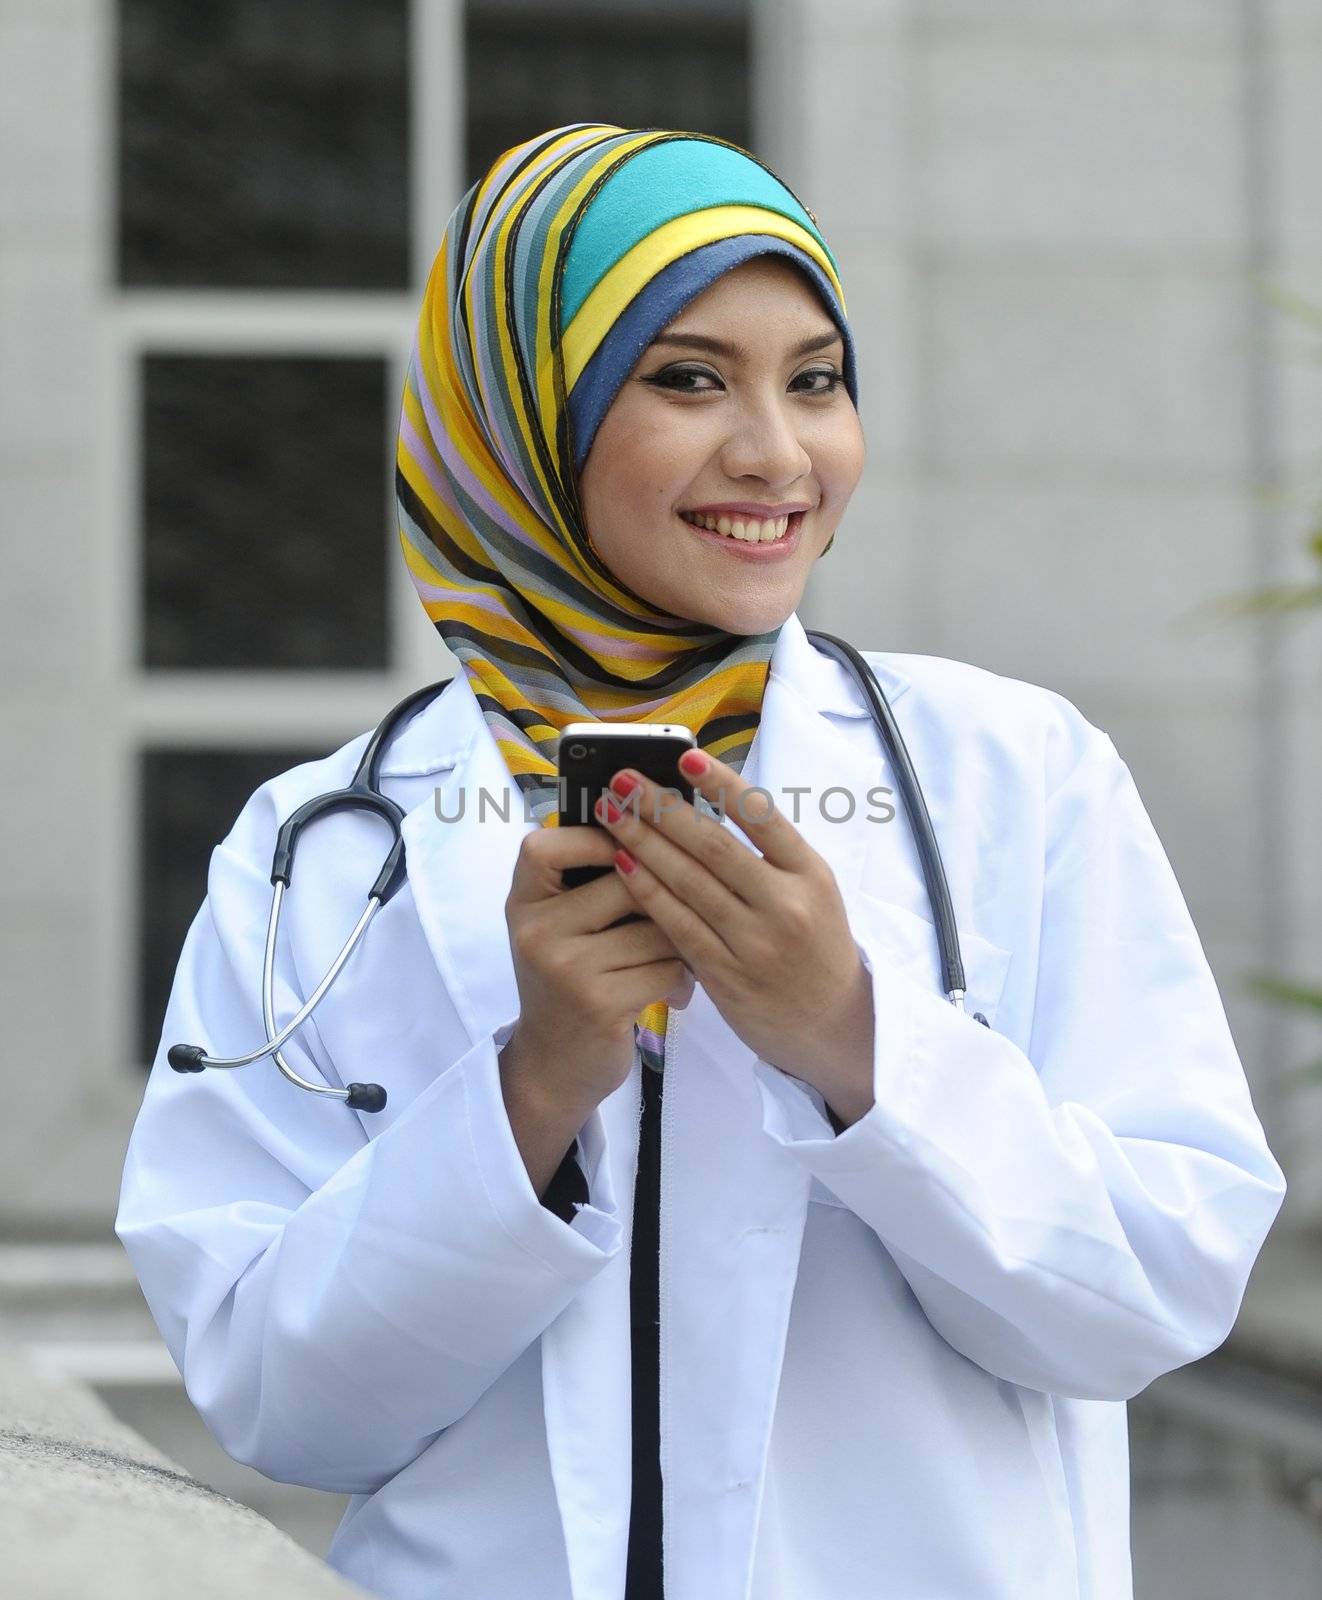 Women Doctor With Scarf use smart phone